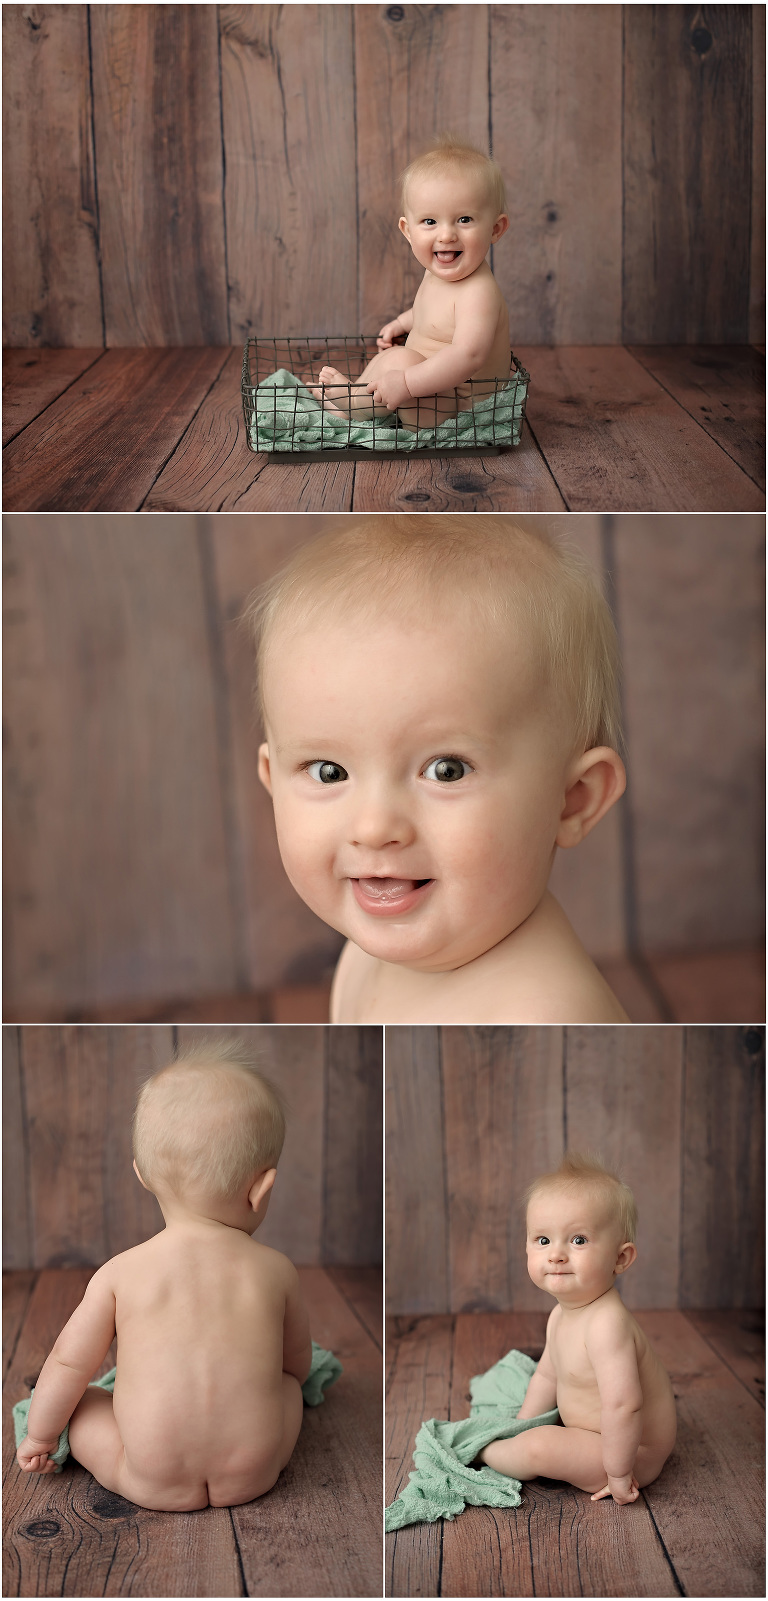 8 month old baby sitting in wire basket with wood backdrops and mint wrap.